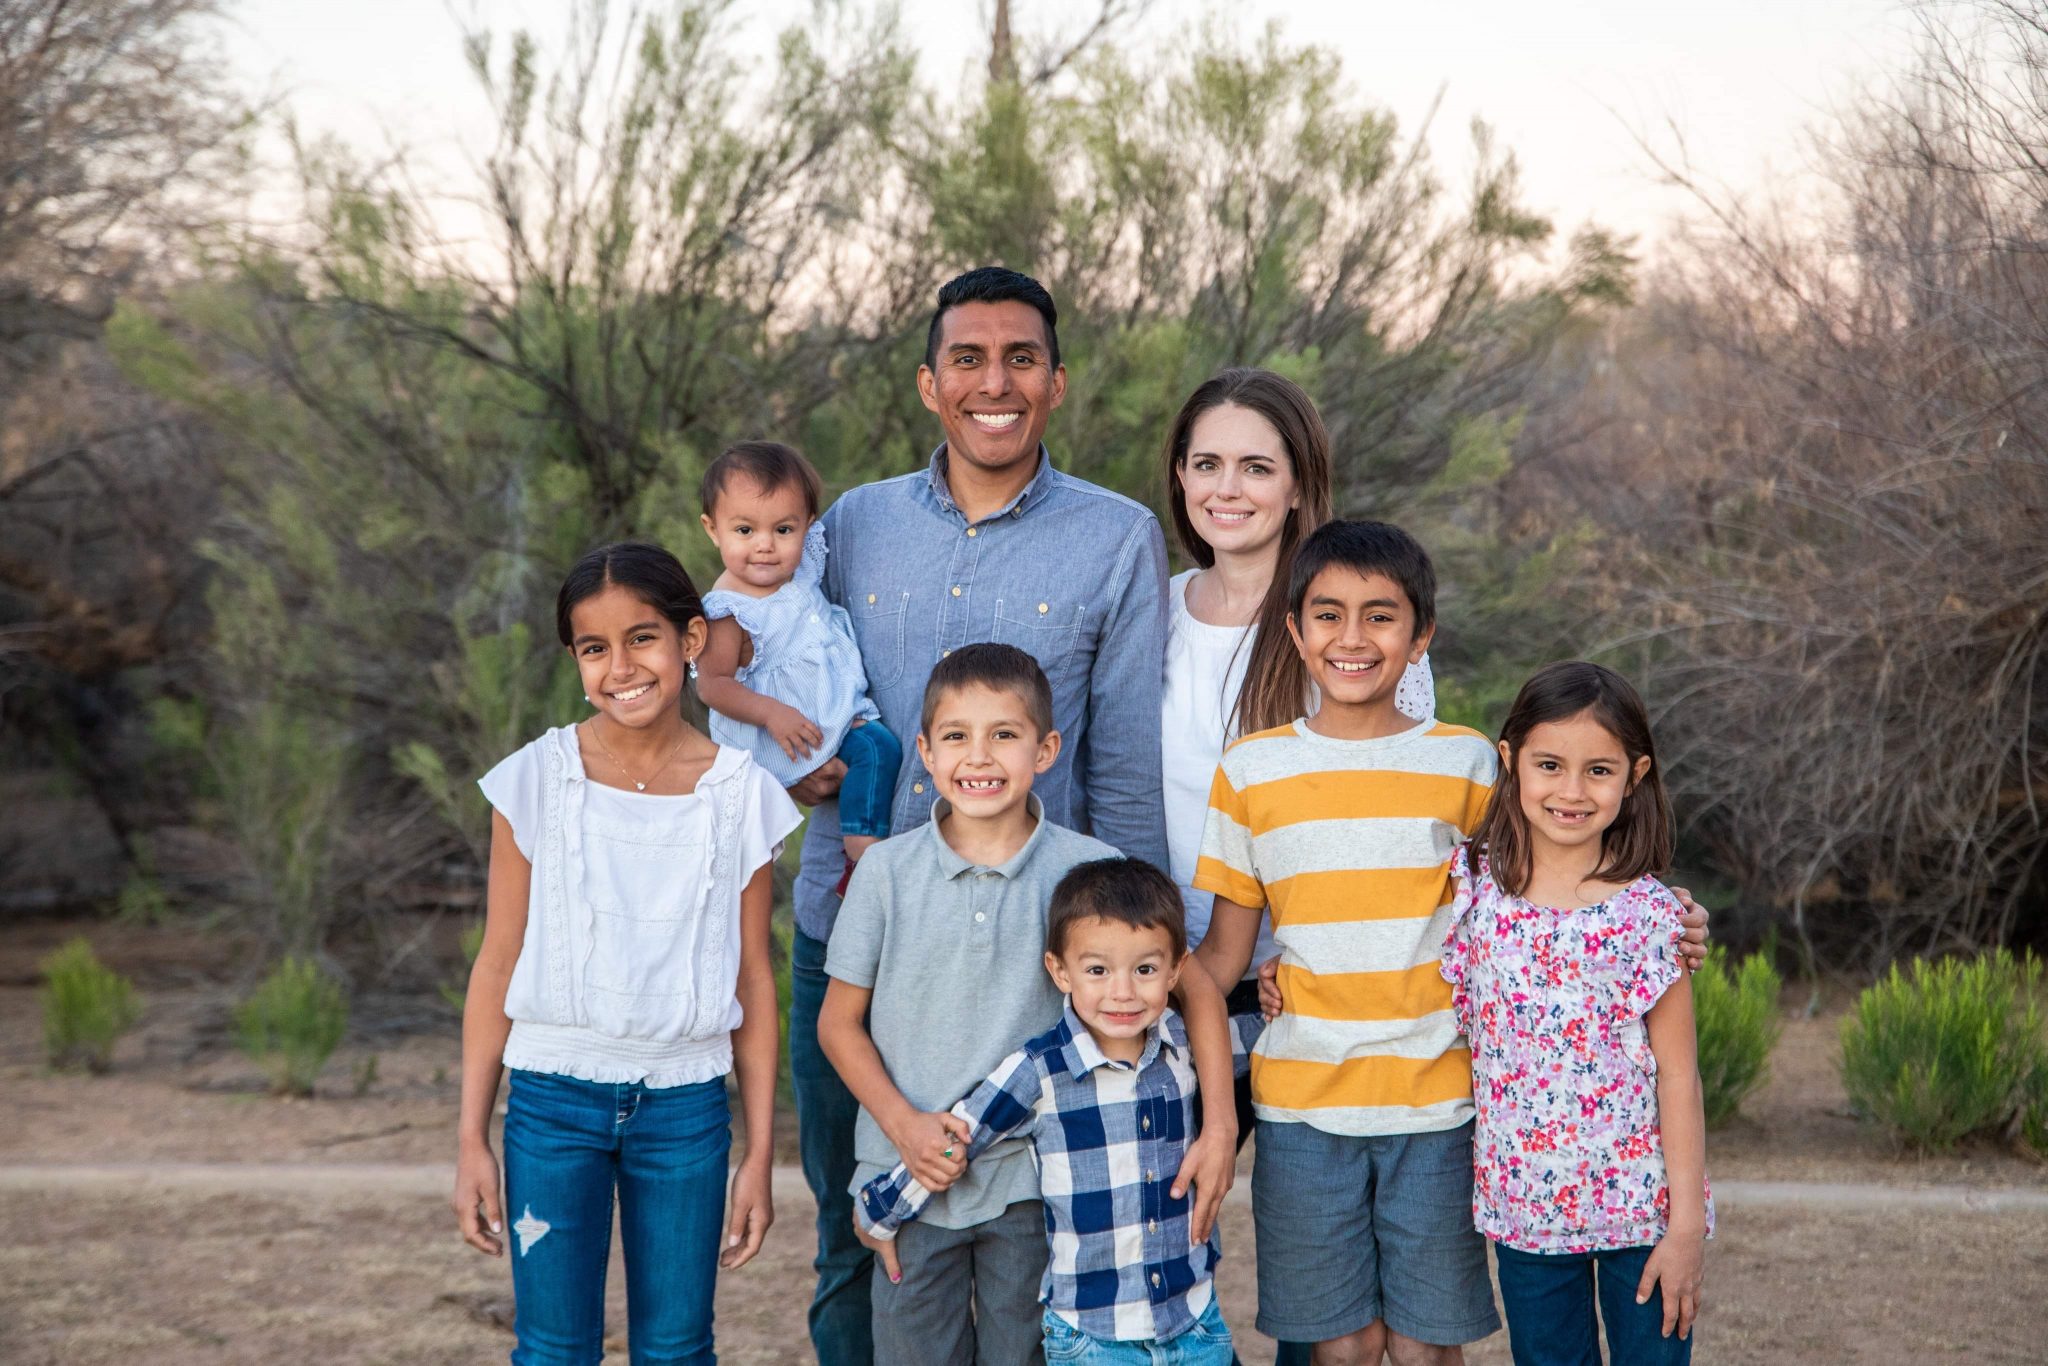 Alumni Candace and Francisco Osegueda and their children